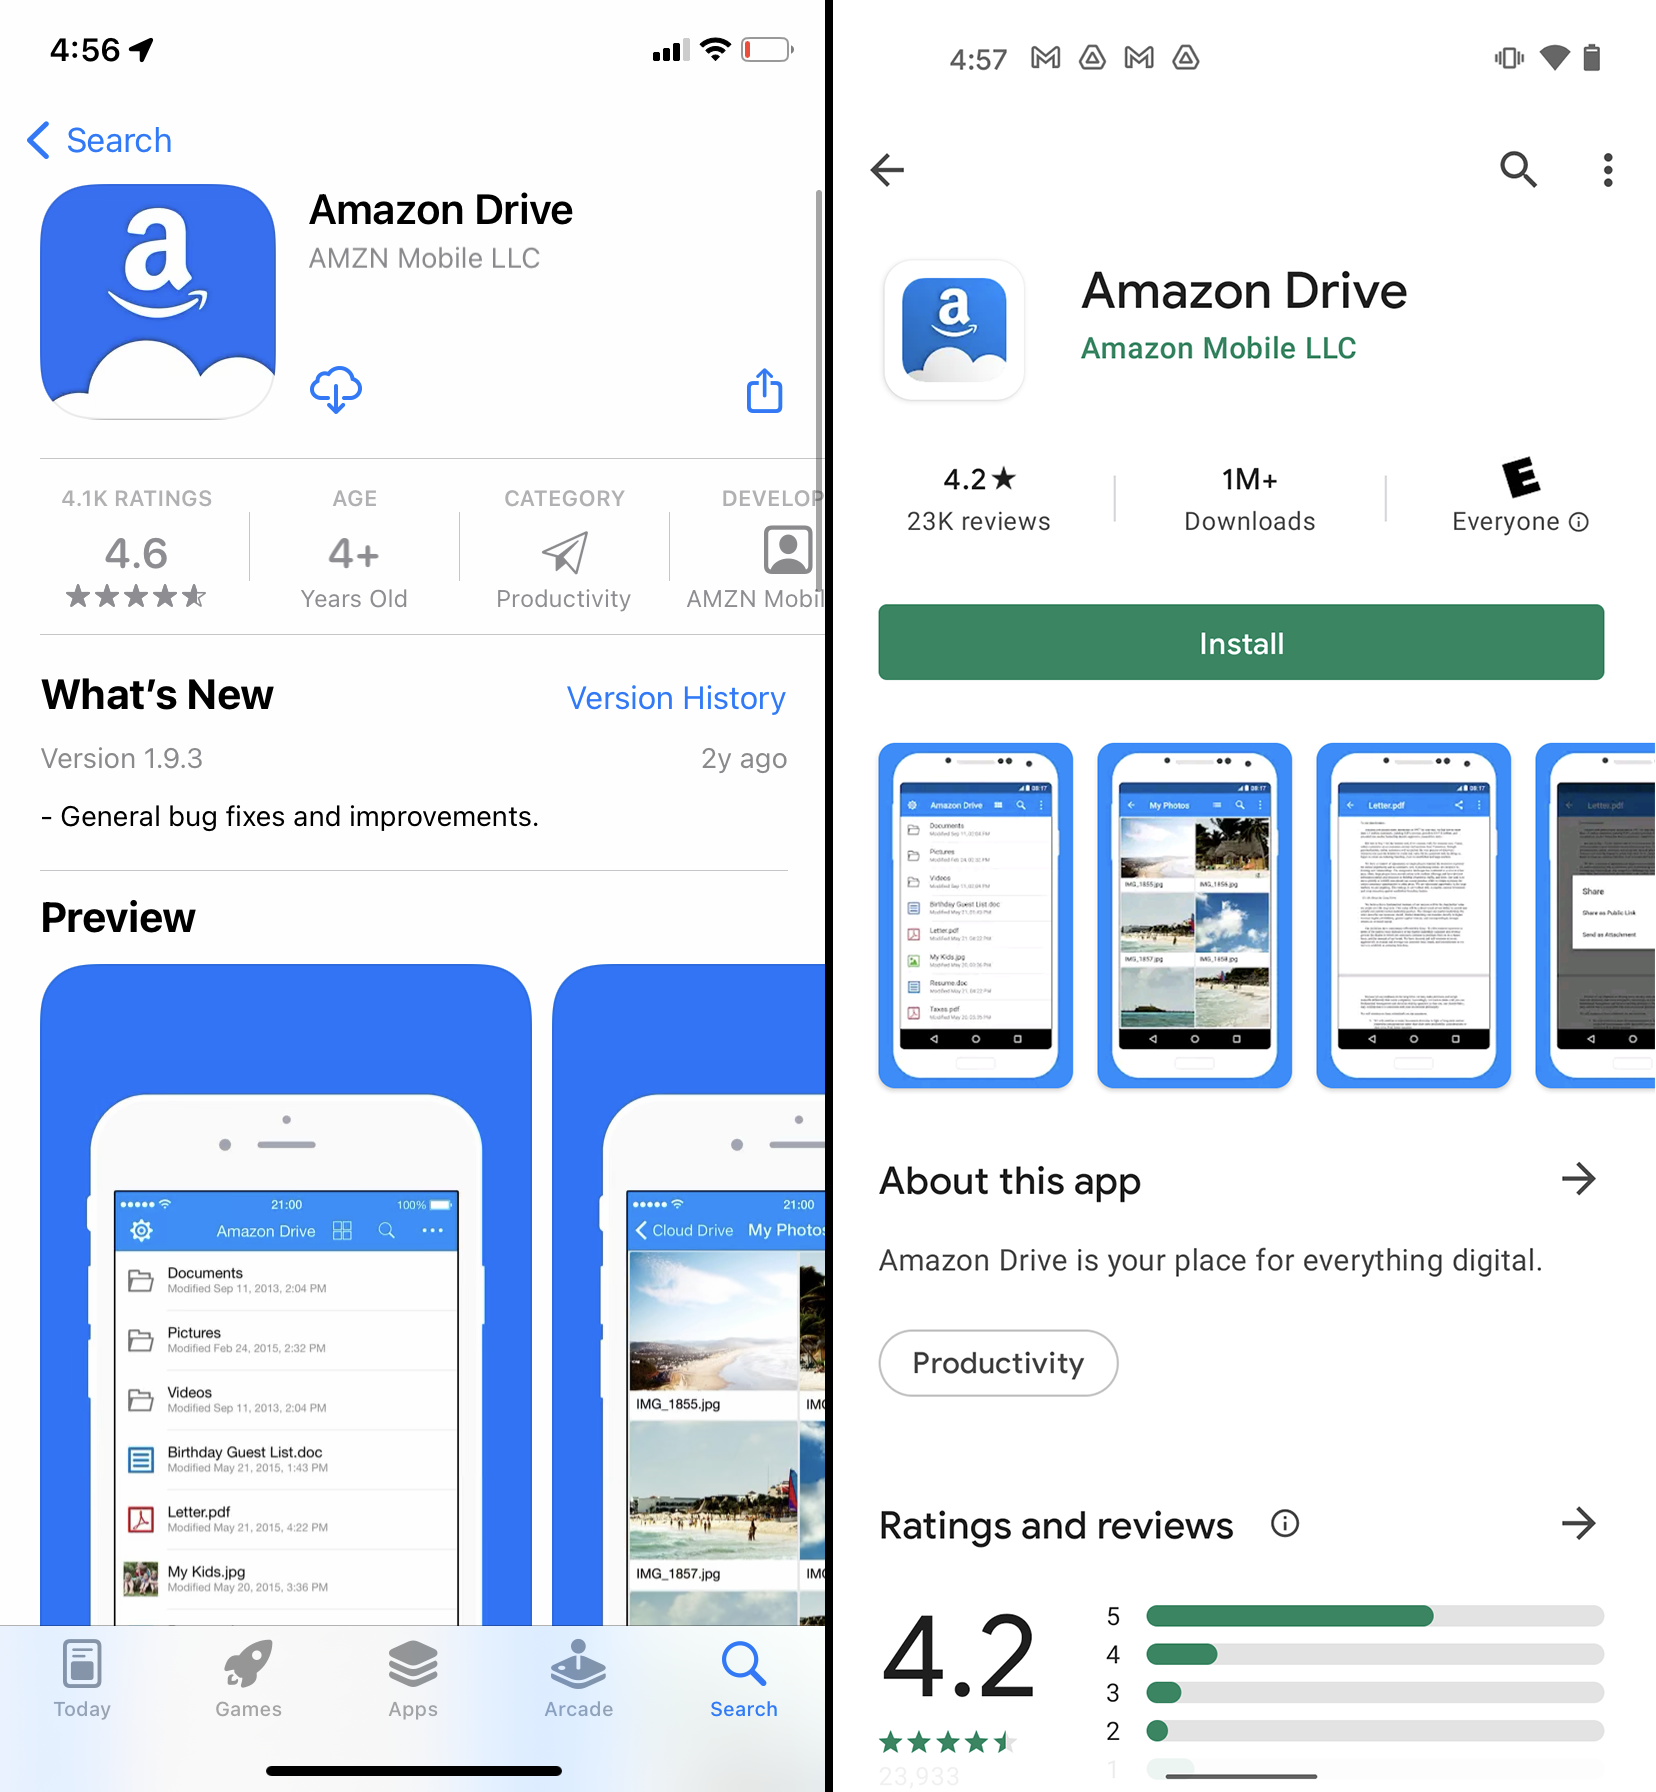 The App Store and Google Play Store pages for the Amazon Drive app.